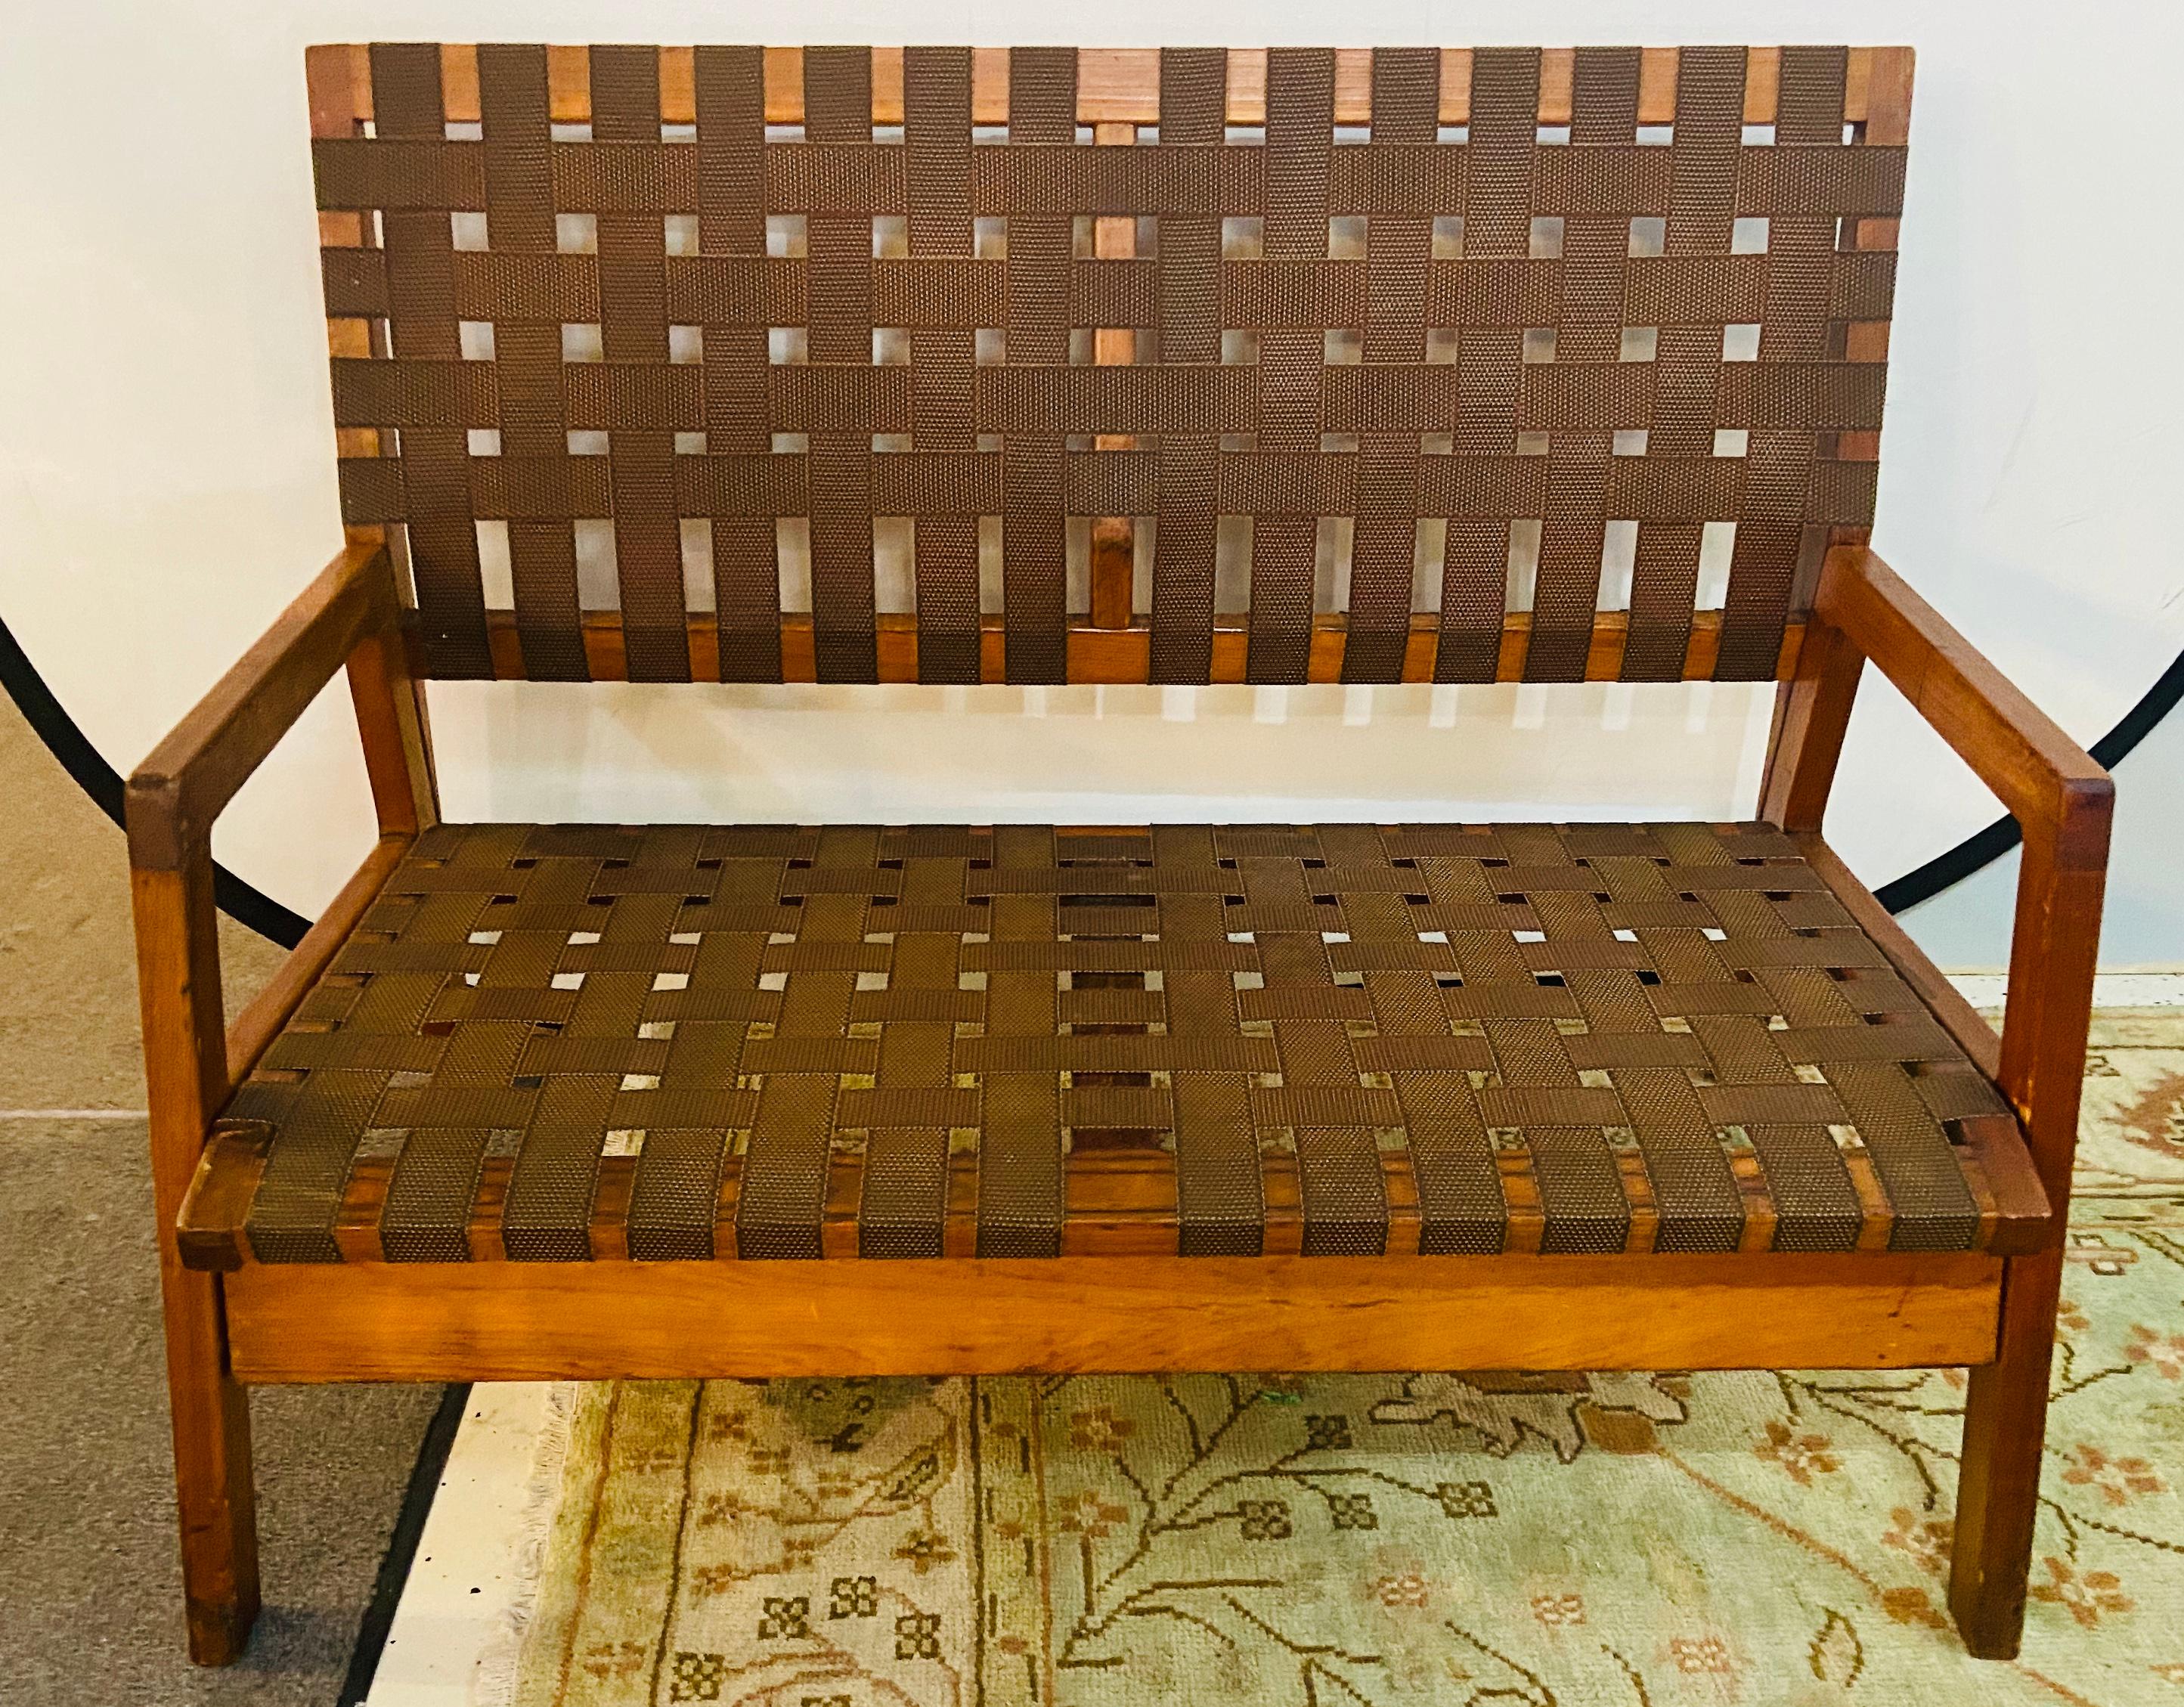 Mid-Century Modern Weaved Strap and Canvas Bench in the manner of Jens Risom
This large and sleek bench in the style of Jens Risom (an examplar of Mid-Century Modern design and one of the first to introduce the MCM design to the United States)  is